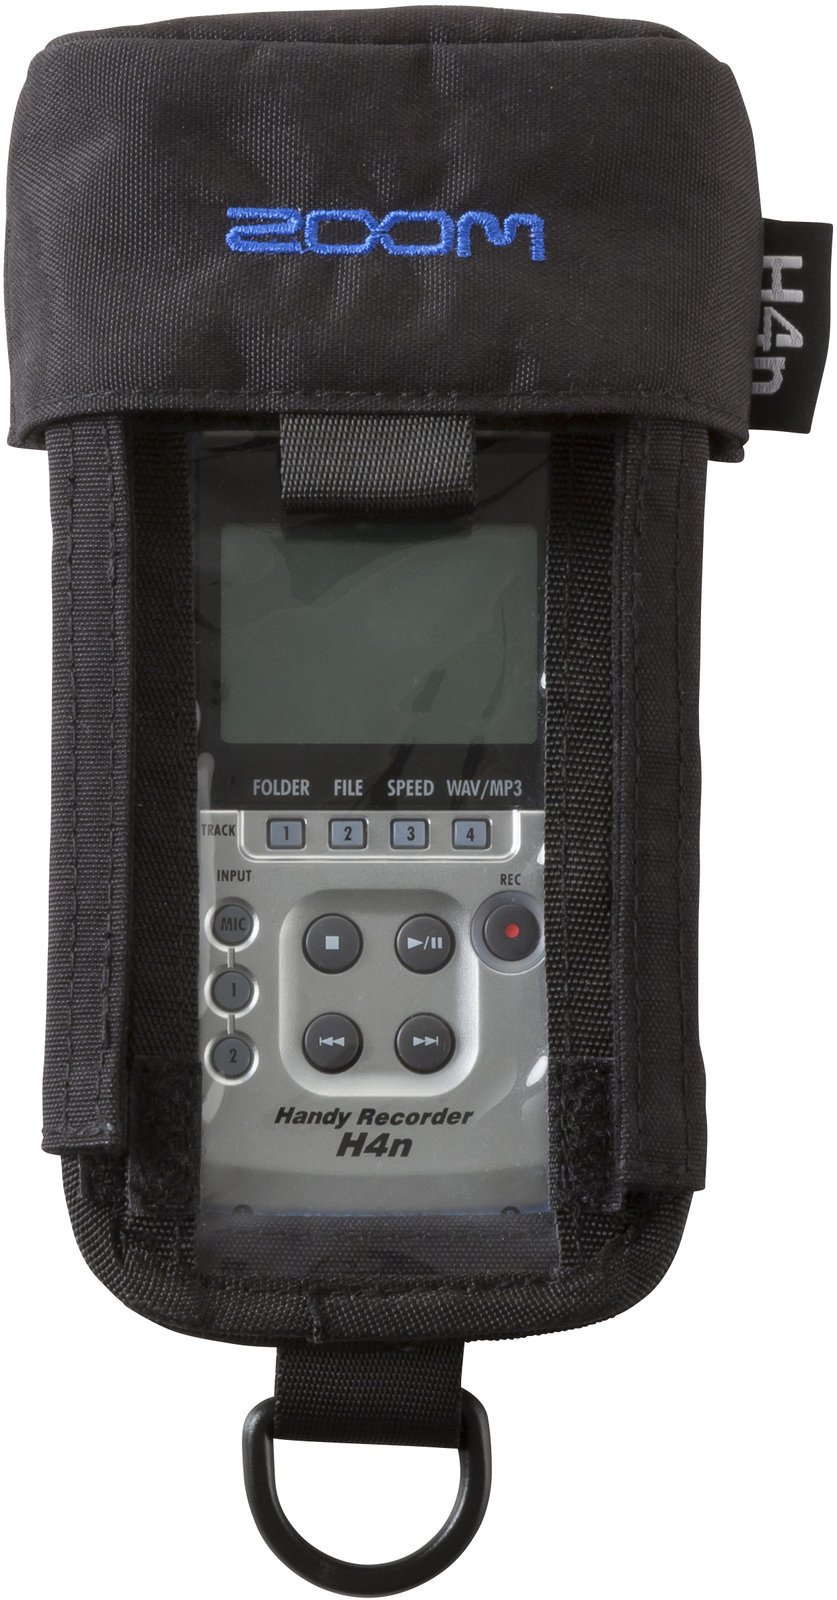 Cover for digital recorders Zoom PCH-4n Cover for digital recorders